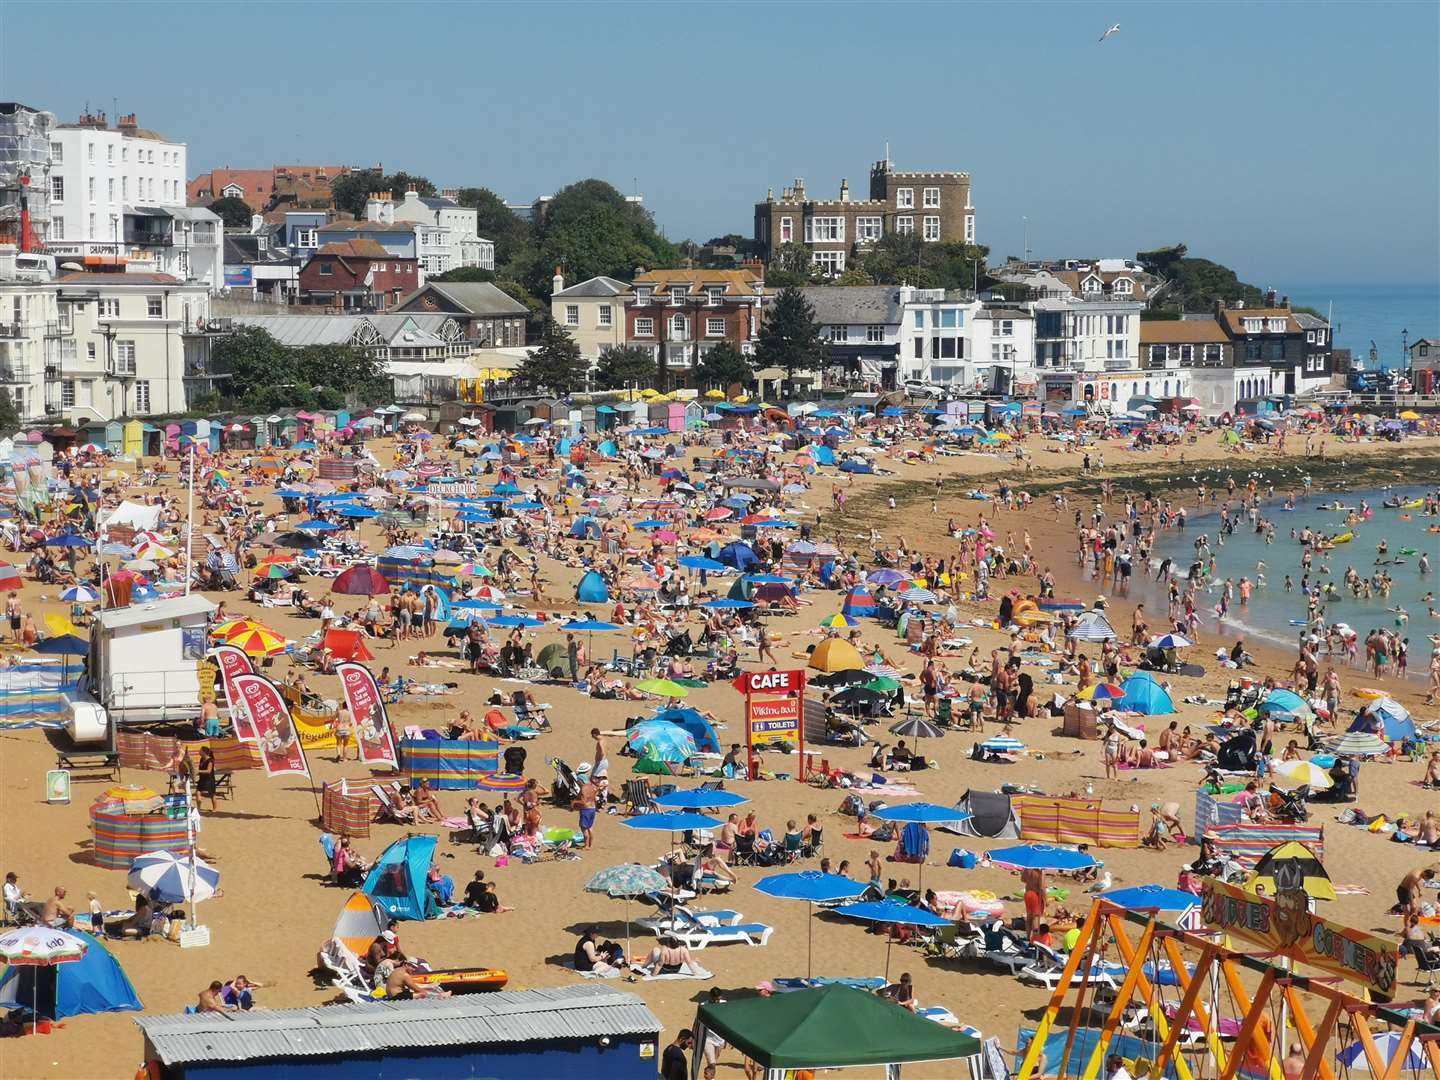 Crowds flock to the beach during warm weather